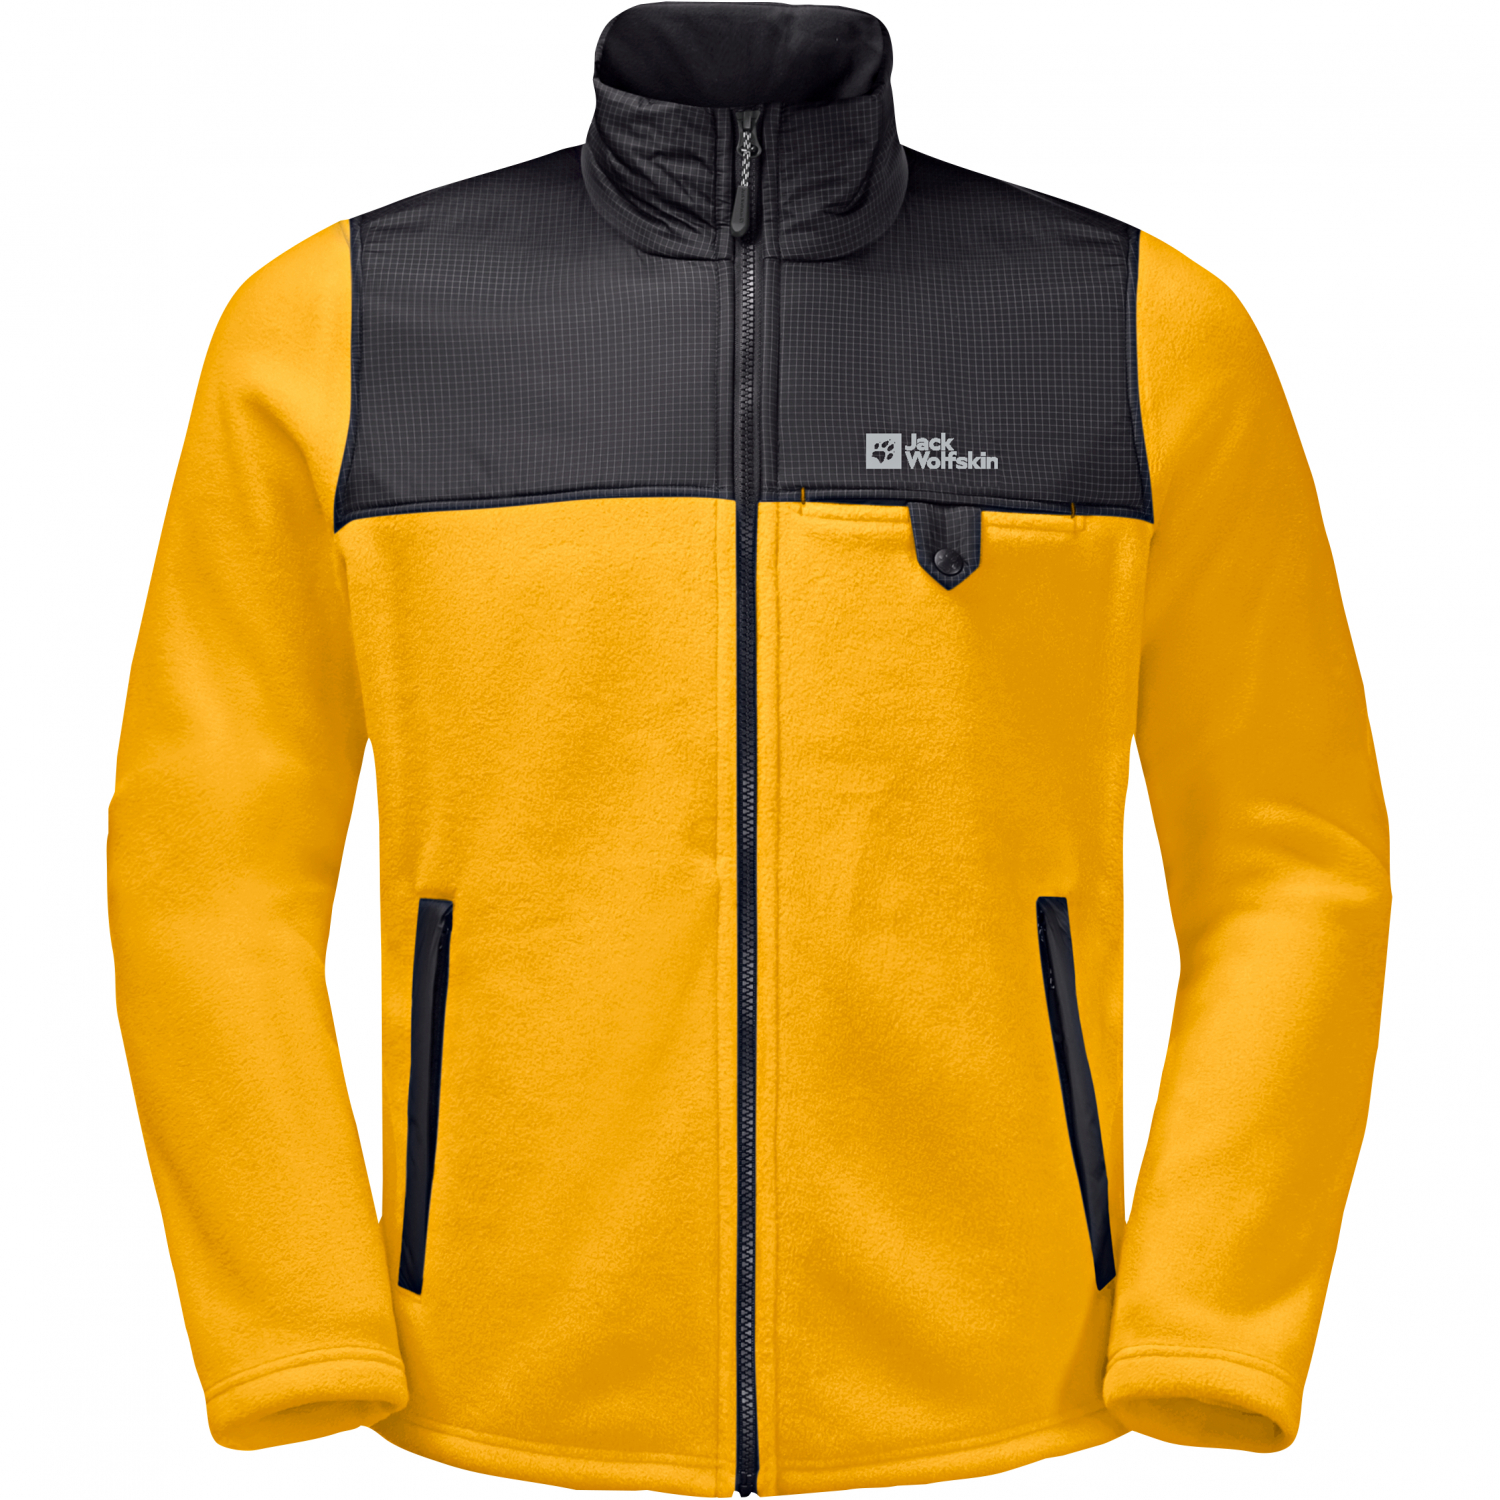 | (yellow/black) Fishing low Shop DNA Grizzly Jack fleece at jacket Mens prices Askari Wolfskin